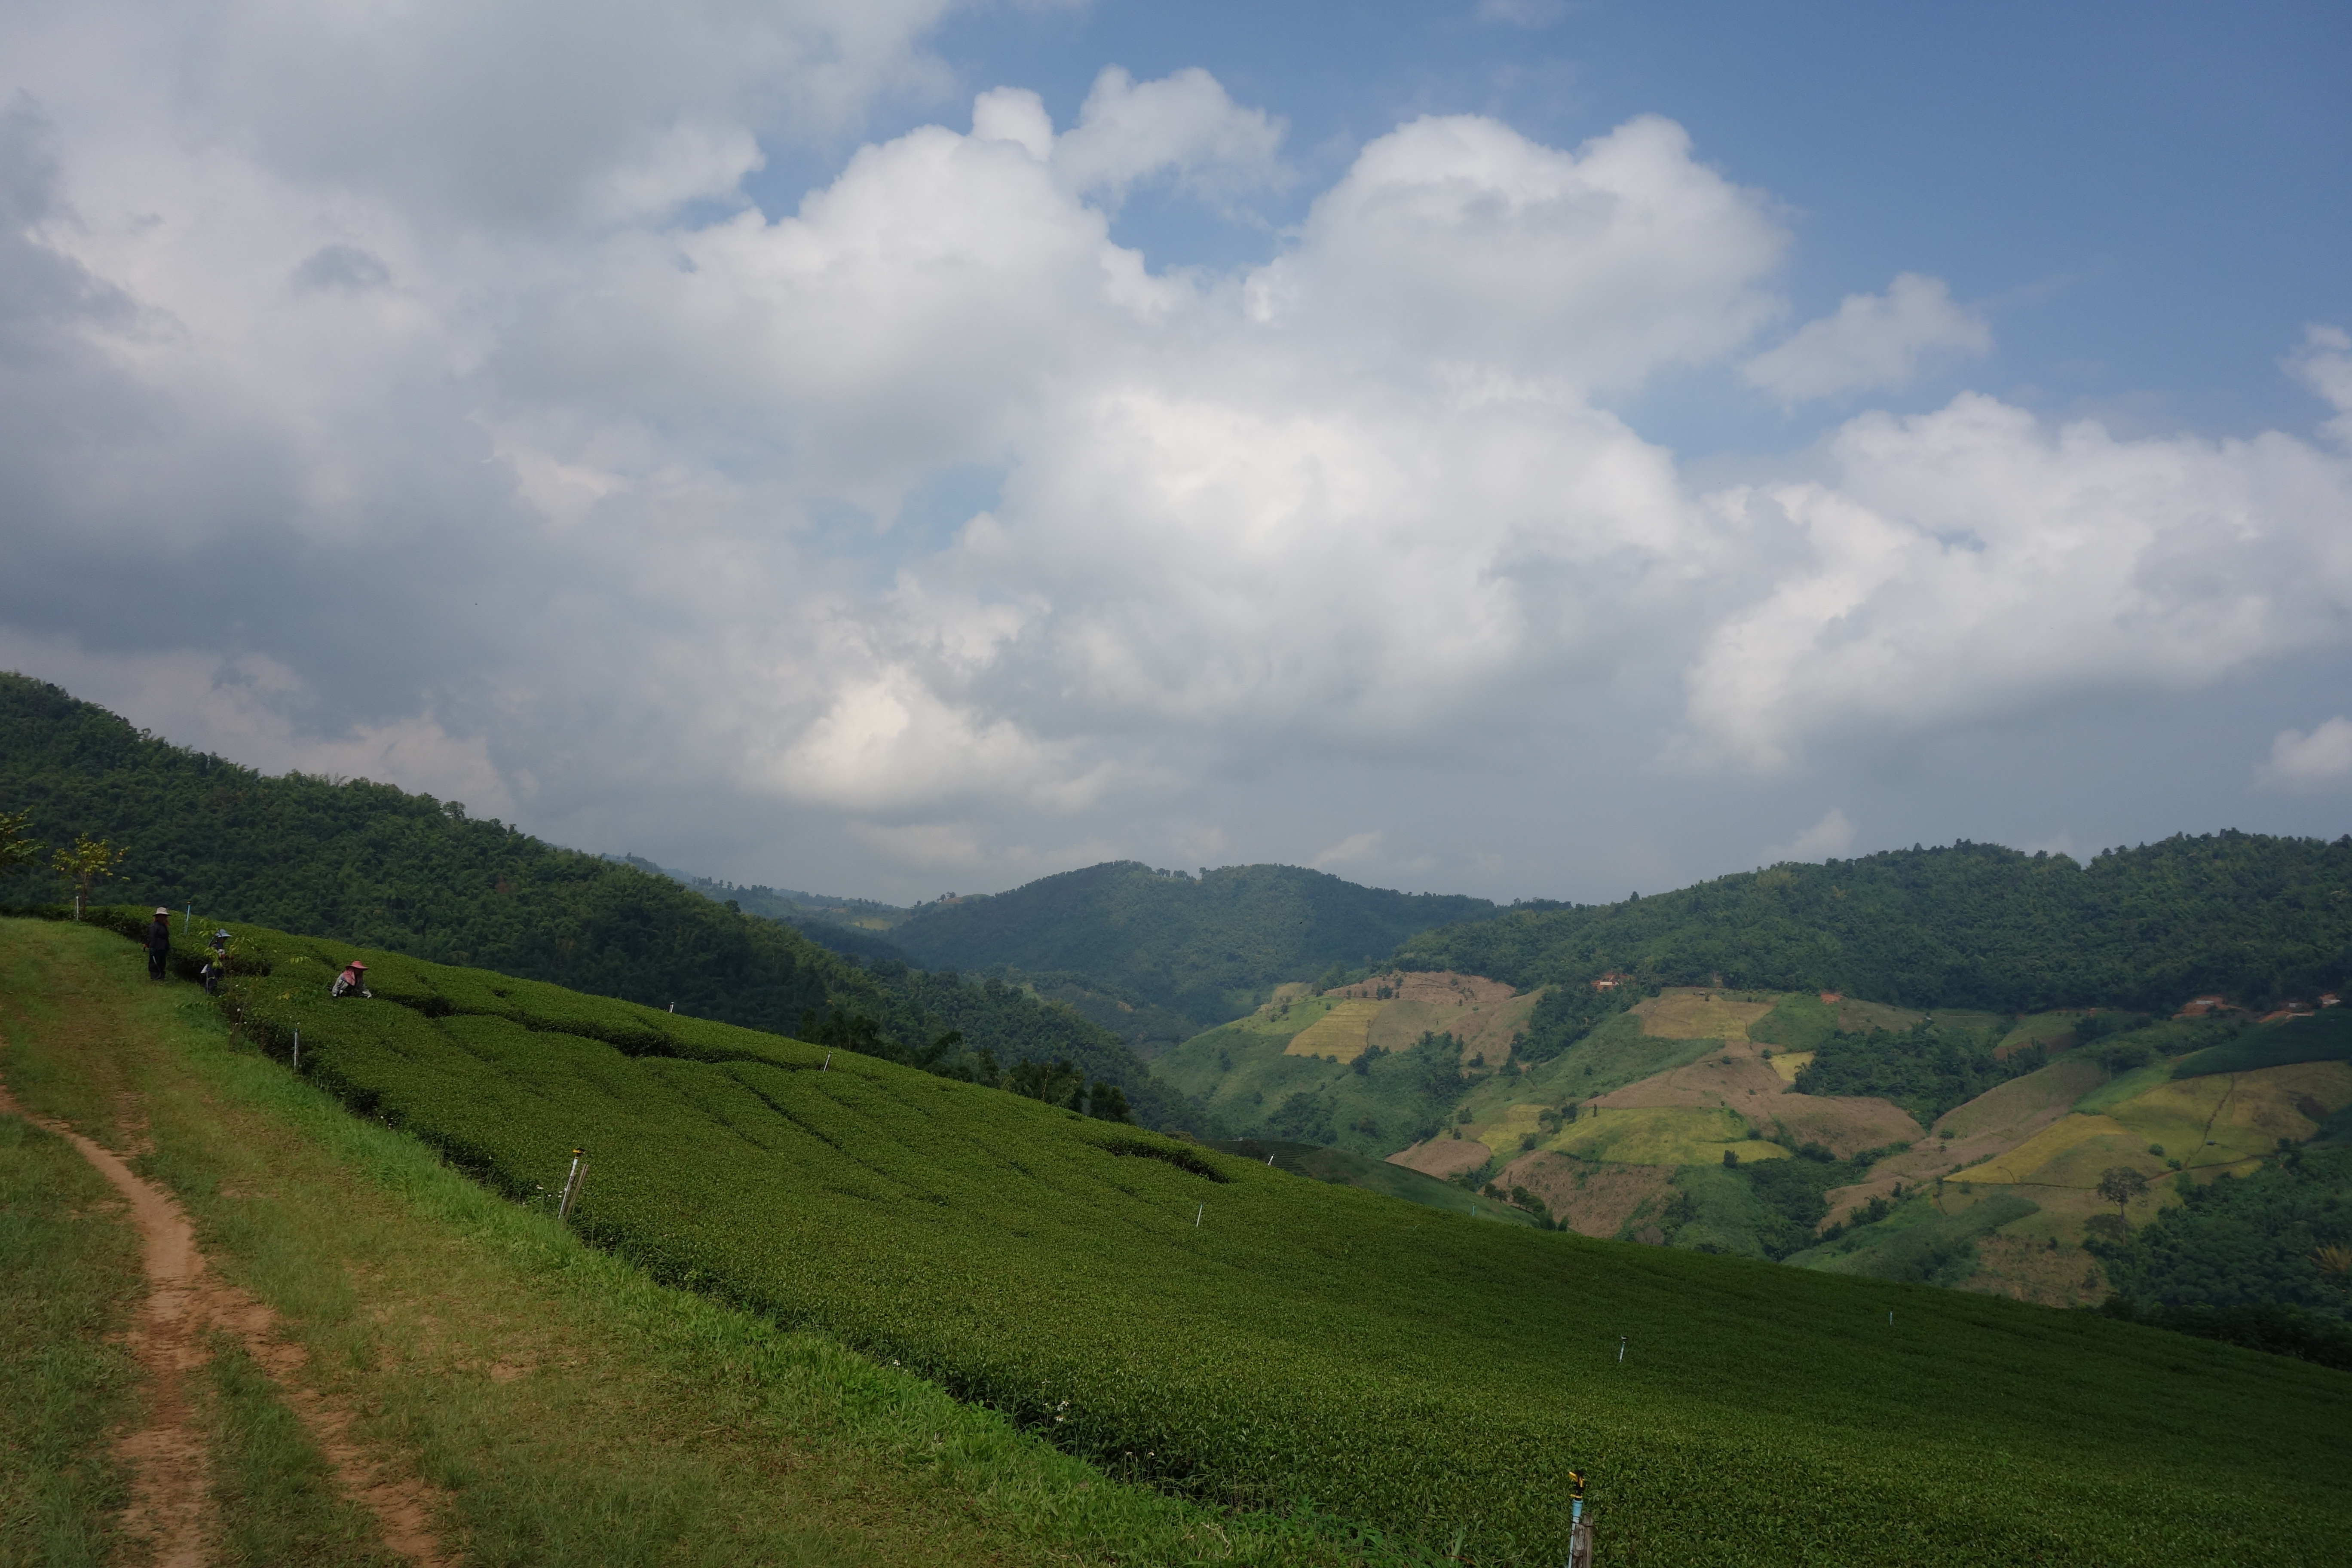 Opium farms have been replaced with tea plantations. There are plenty of places to taste the local brews by the roadside.